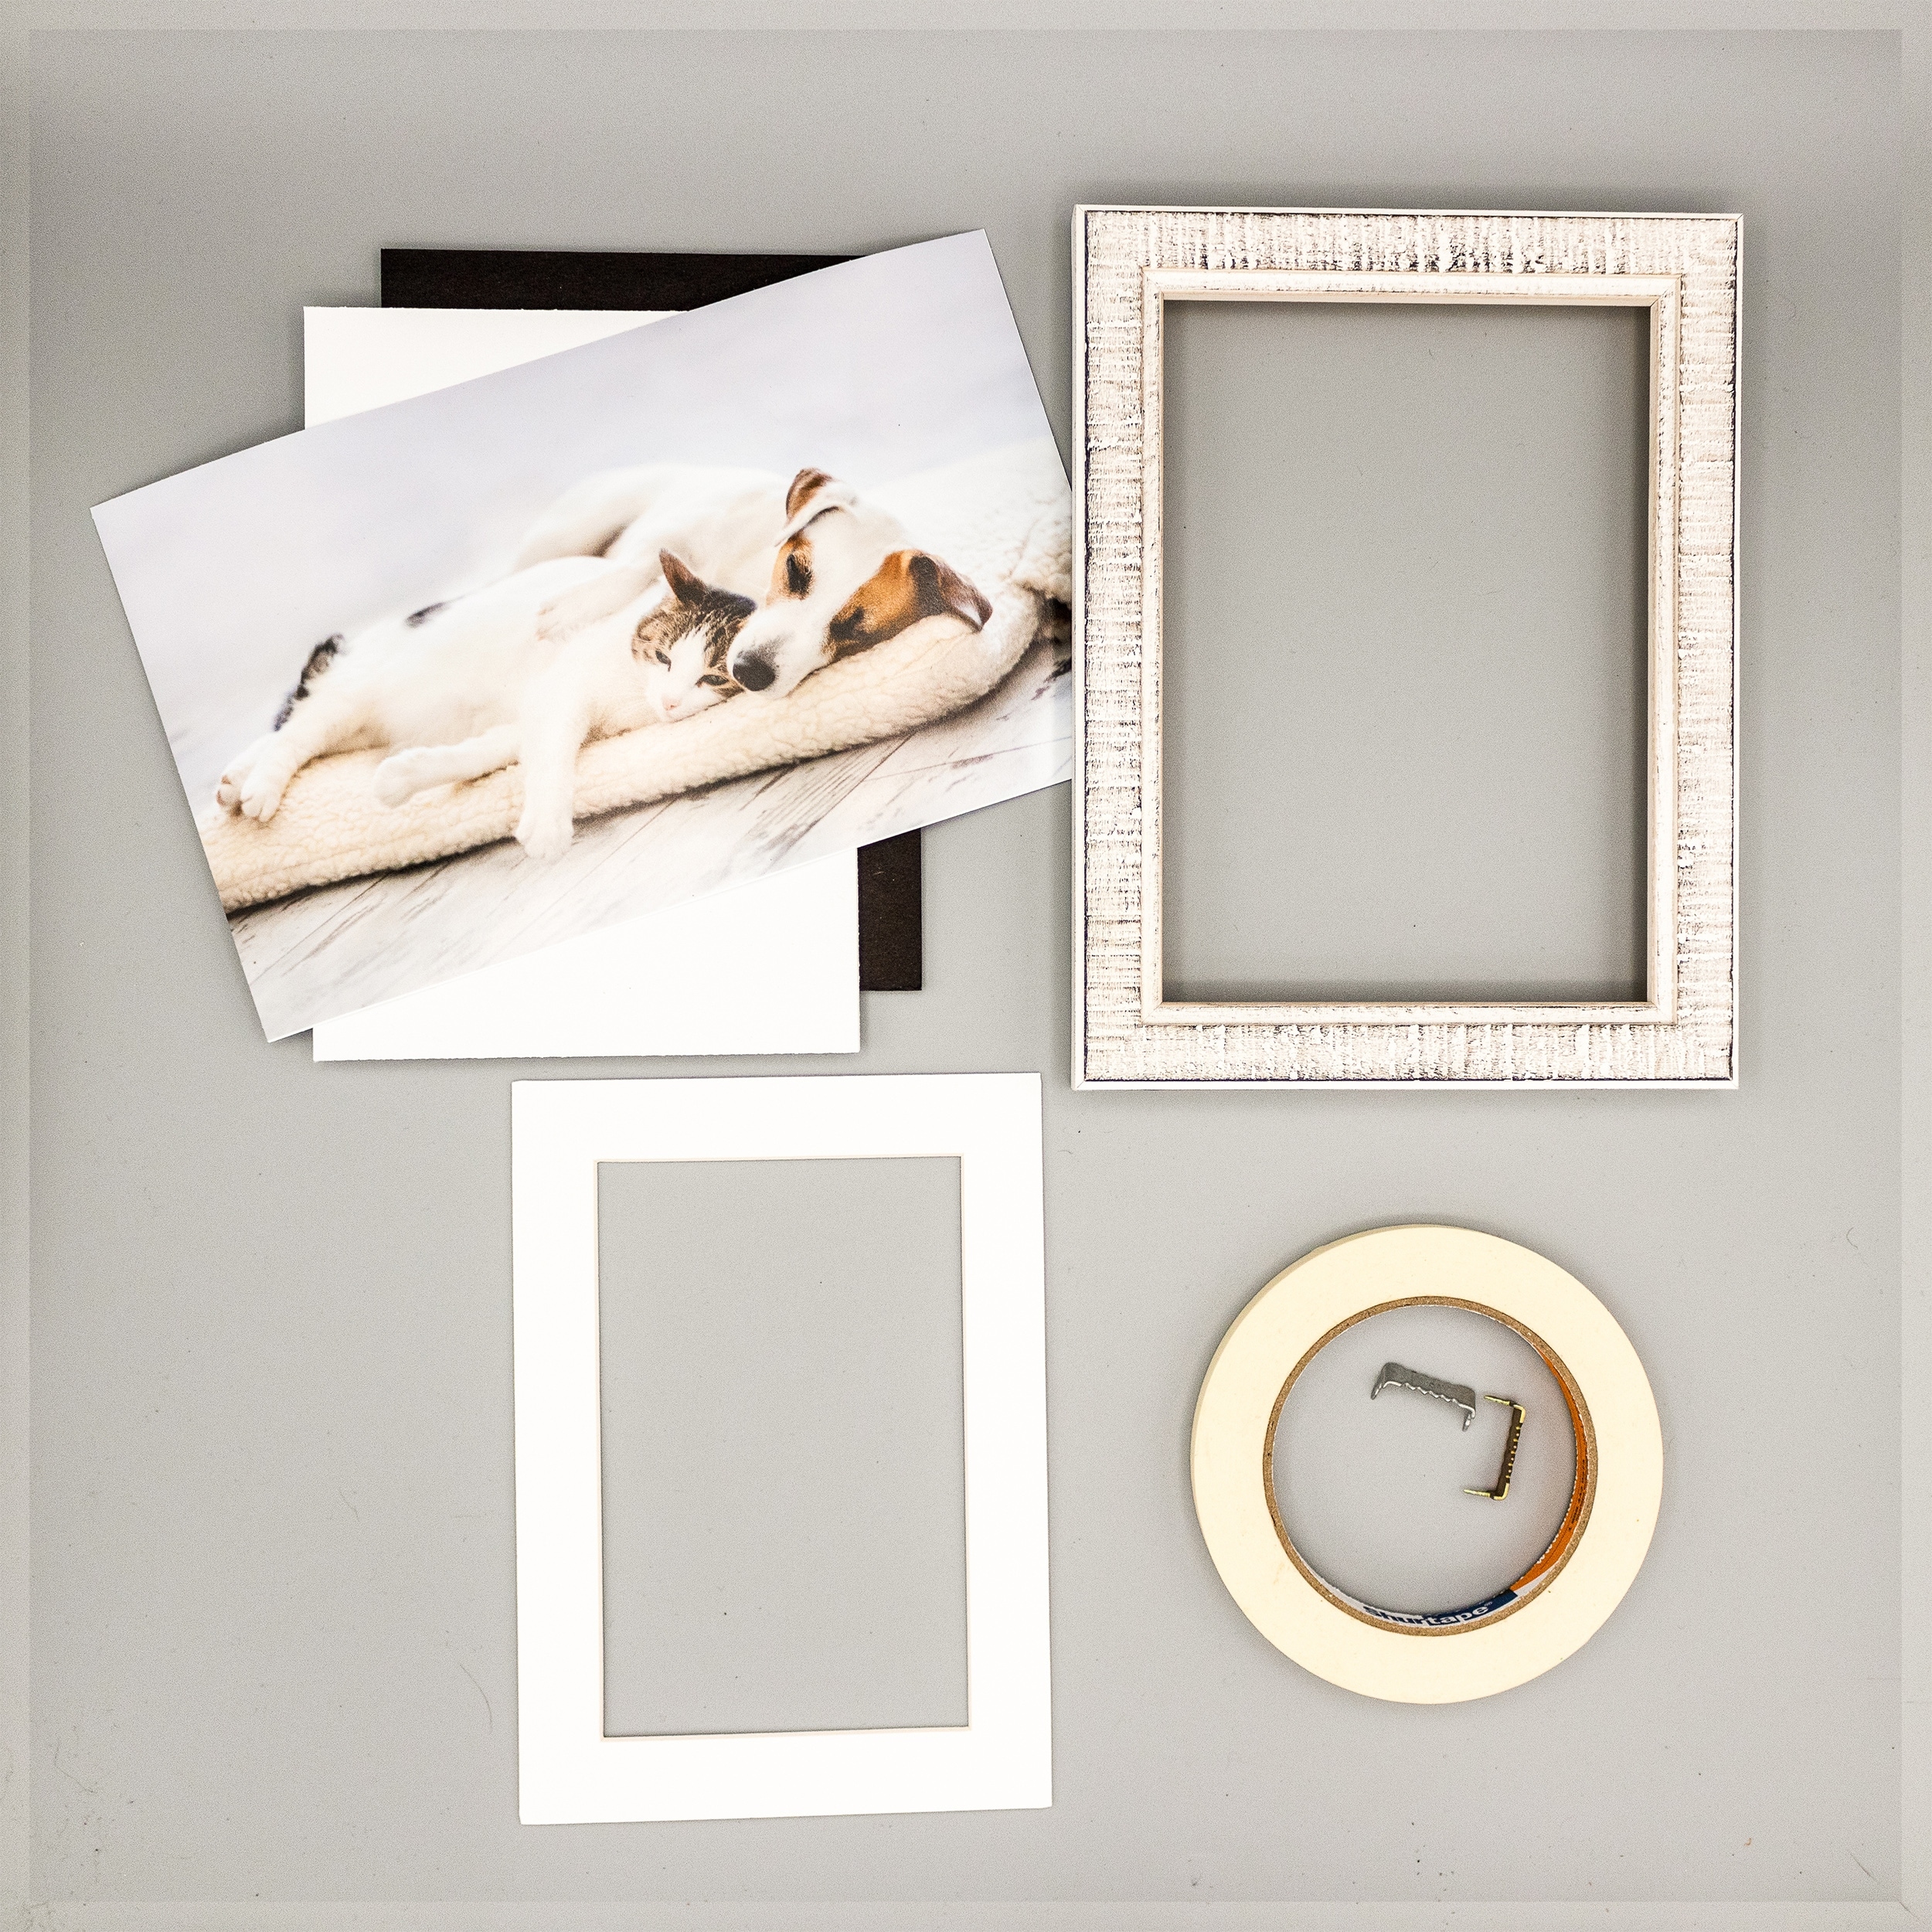 5x7 Mat for 8x10 Frame - Precut Mat Board Acid-Free Textured White 5x7 Photo Matte Made to Fit A 8x10 Picture Frame